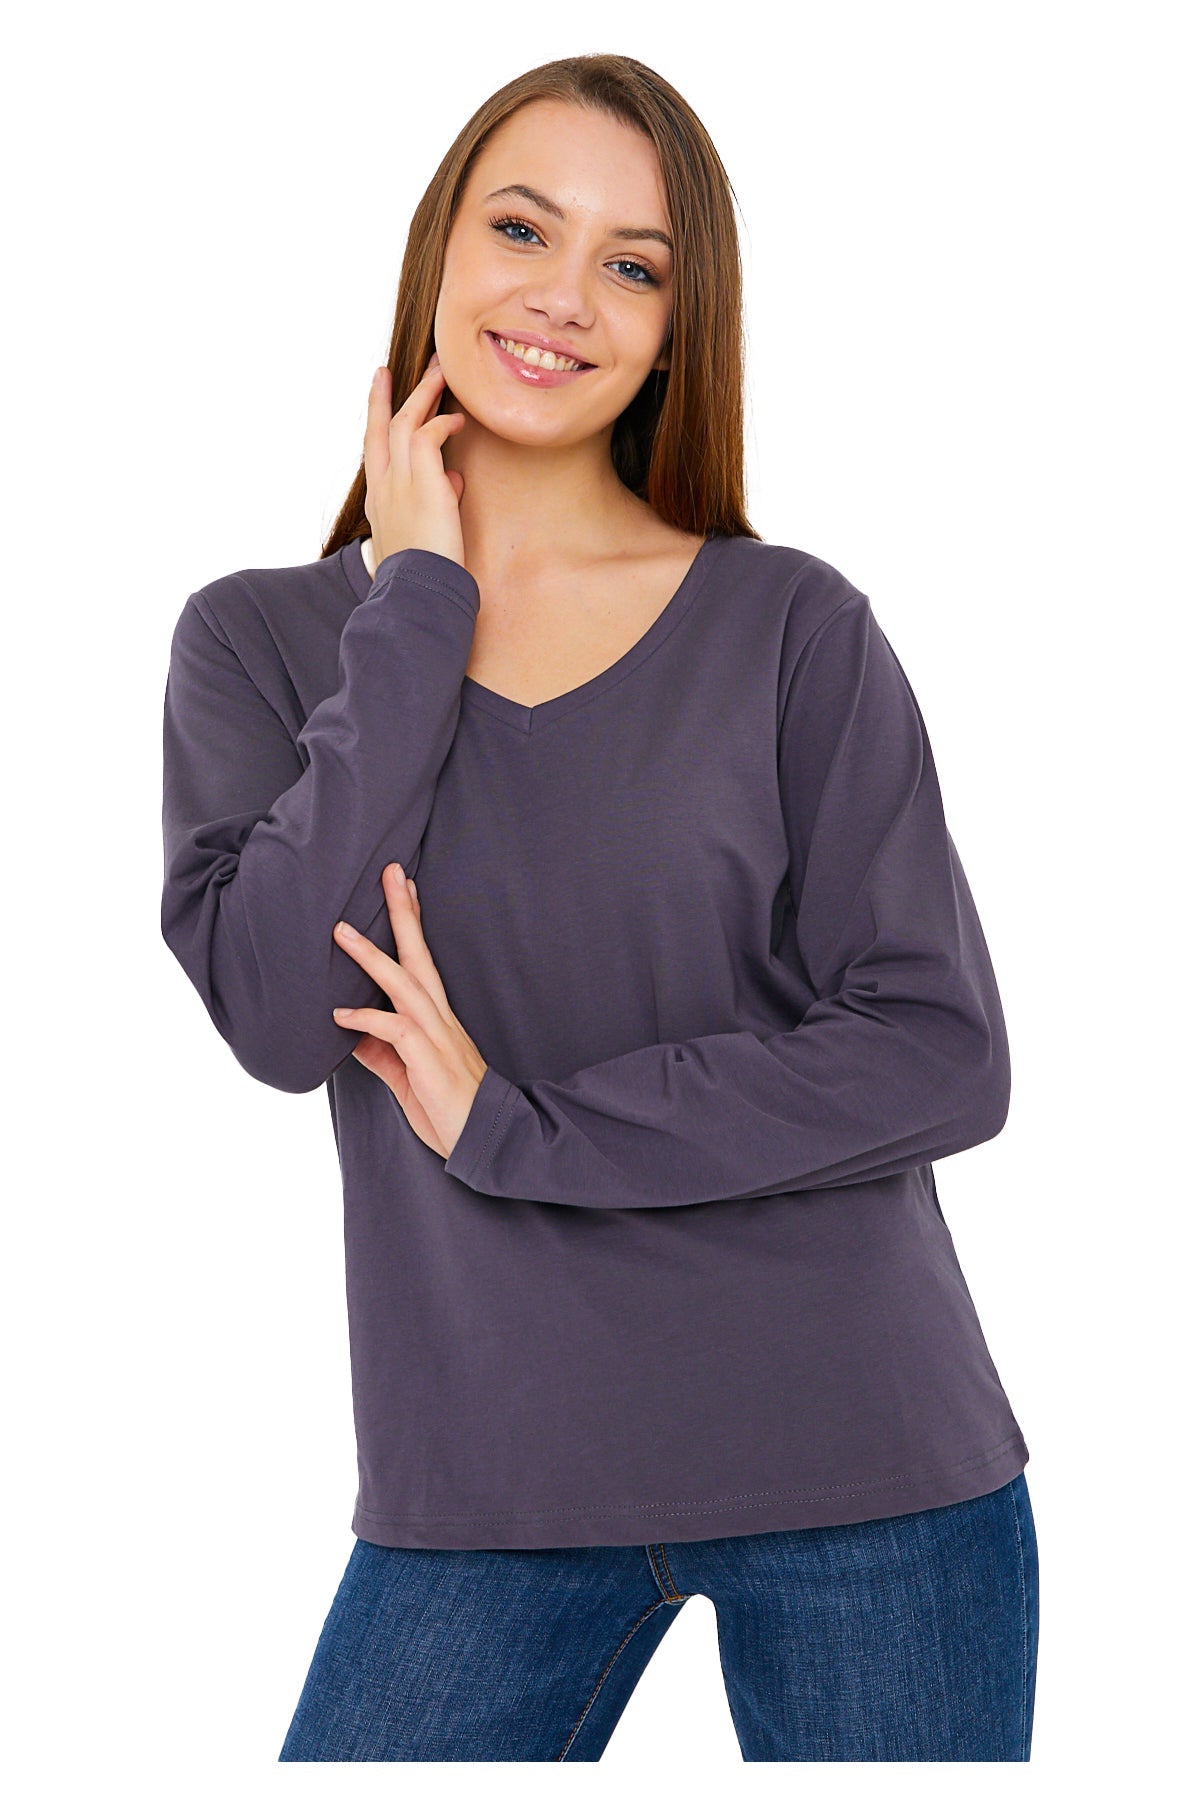 Long Sleeve V Neck T-Shirts for Women & Girls - Colorful Pima Cotton-136